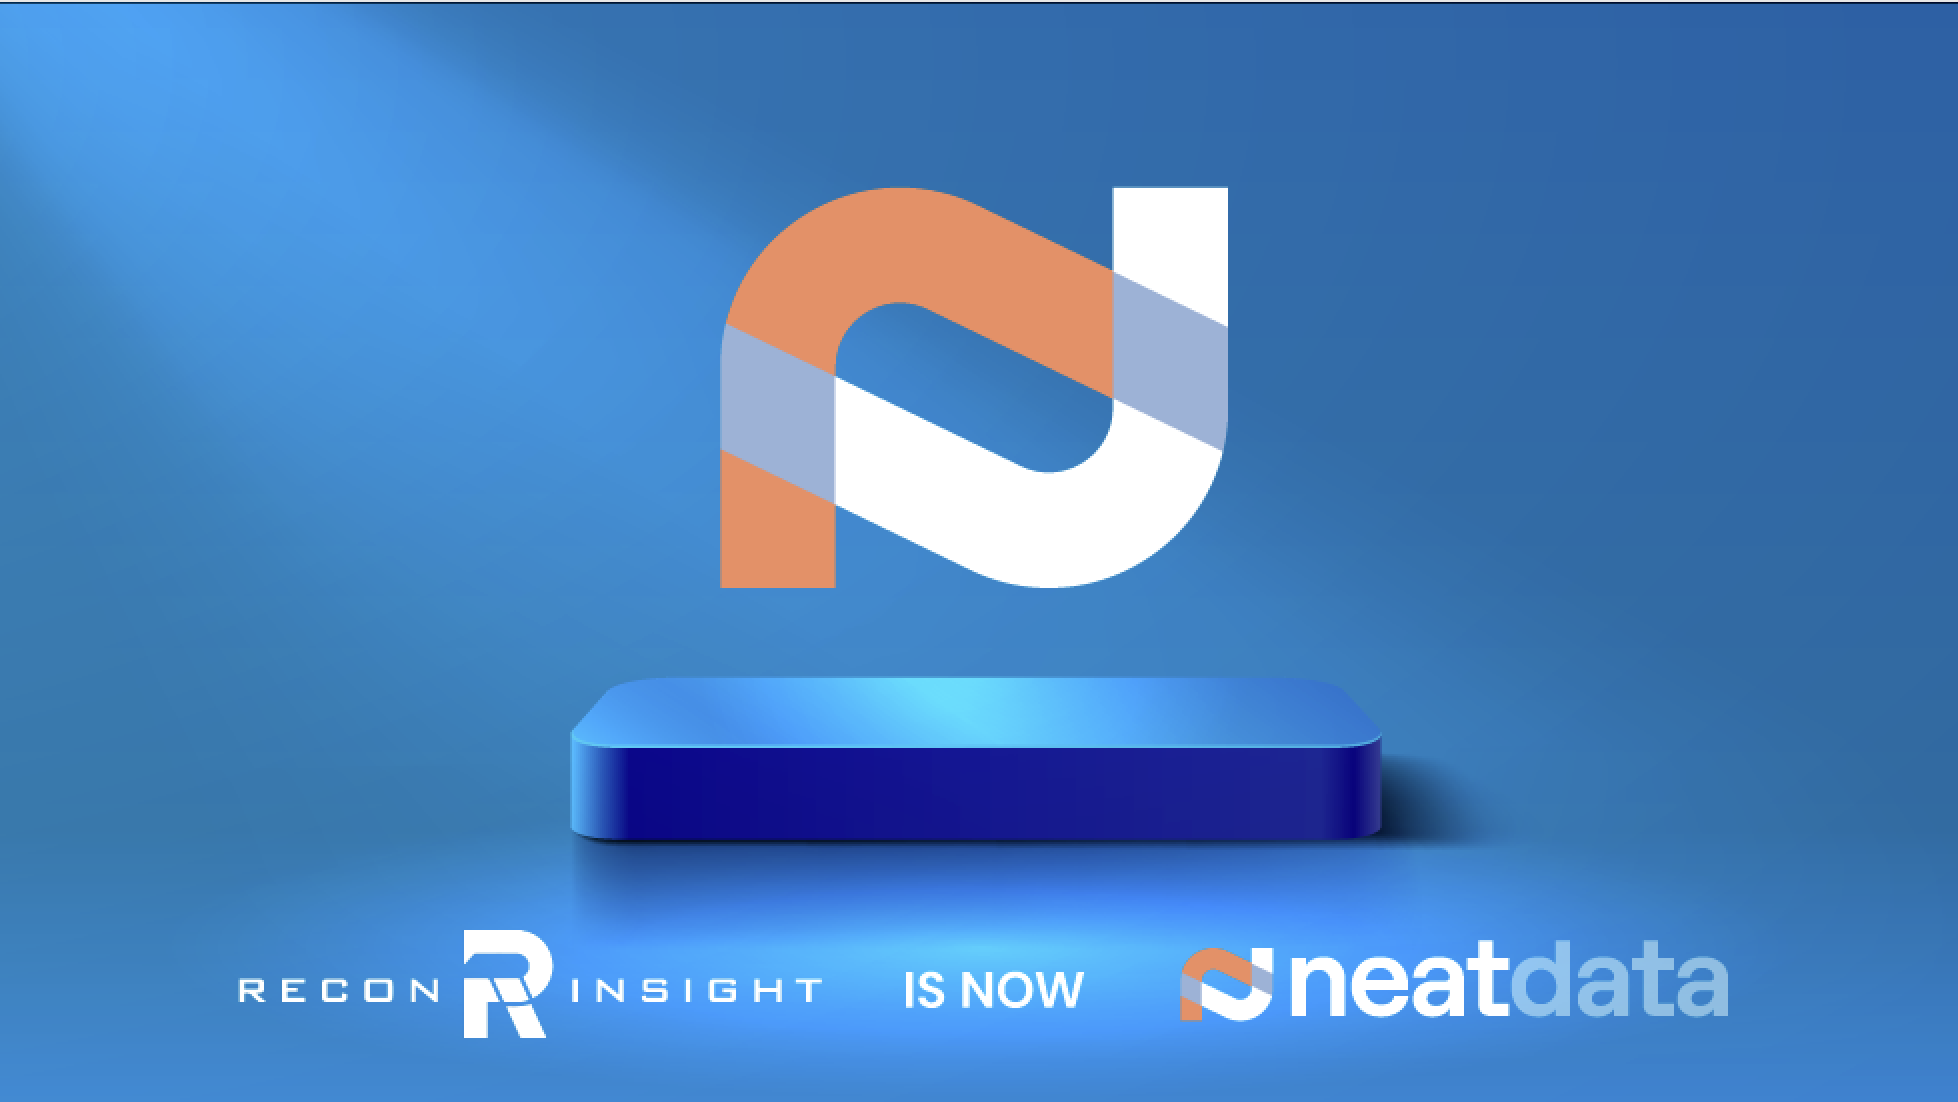 Introducing Neat Data: A New Chapter for Our Company